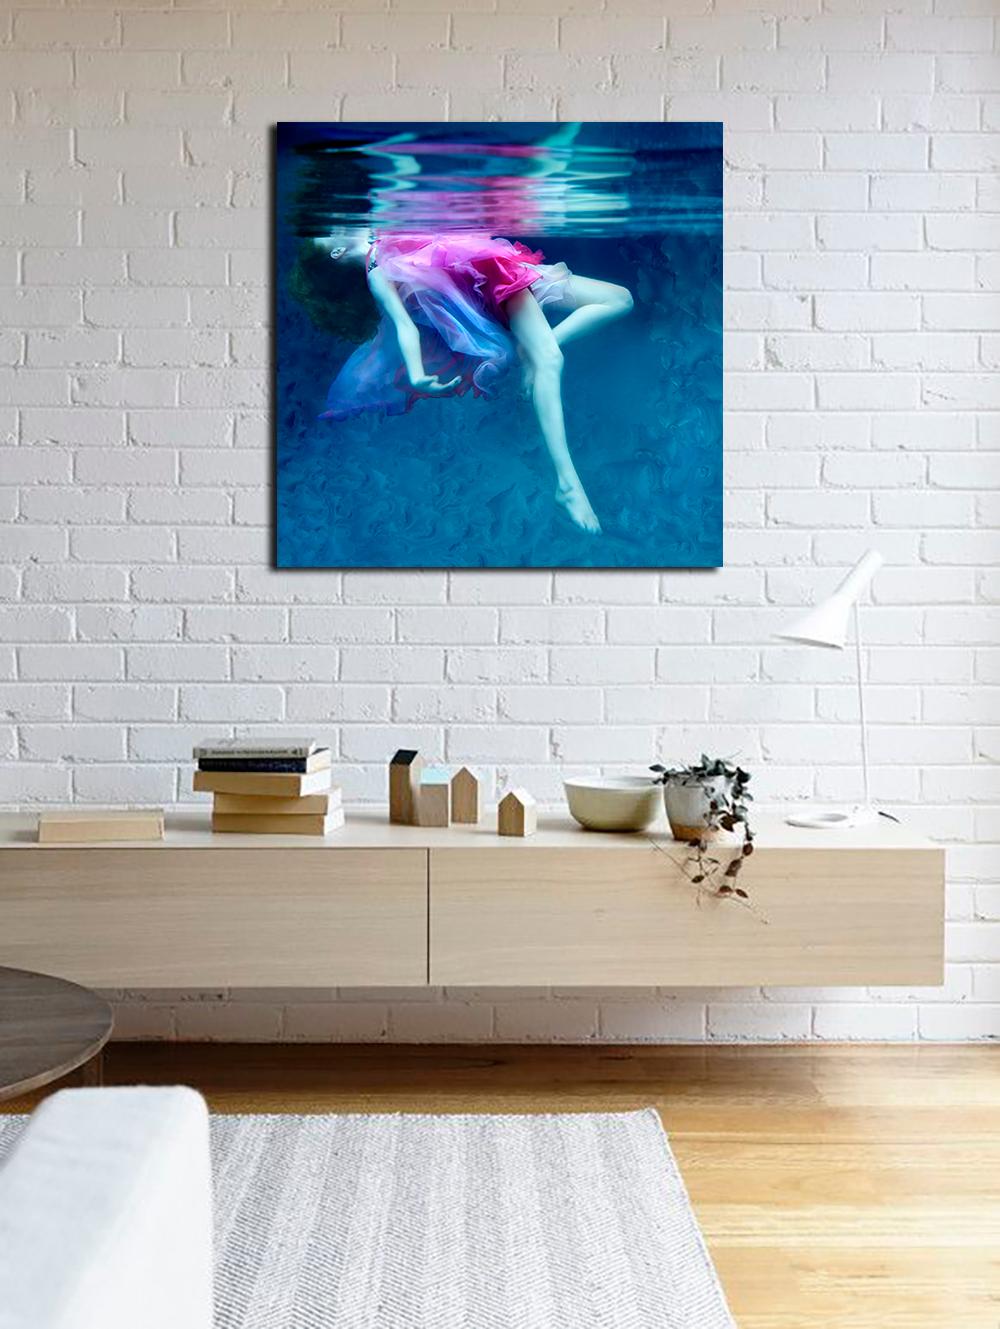 Dream - underwater photography, archival metallic paper contemporary mounted - Photograph by Kathleen Wilke